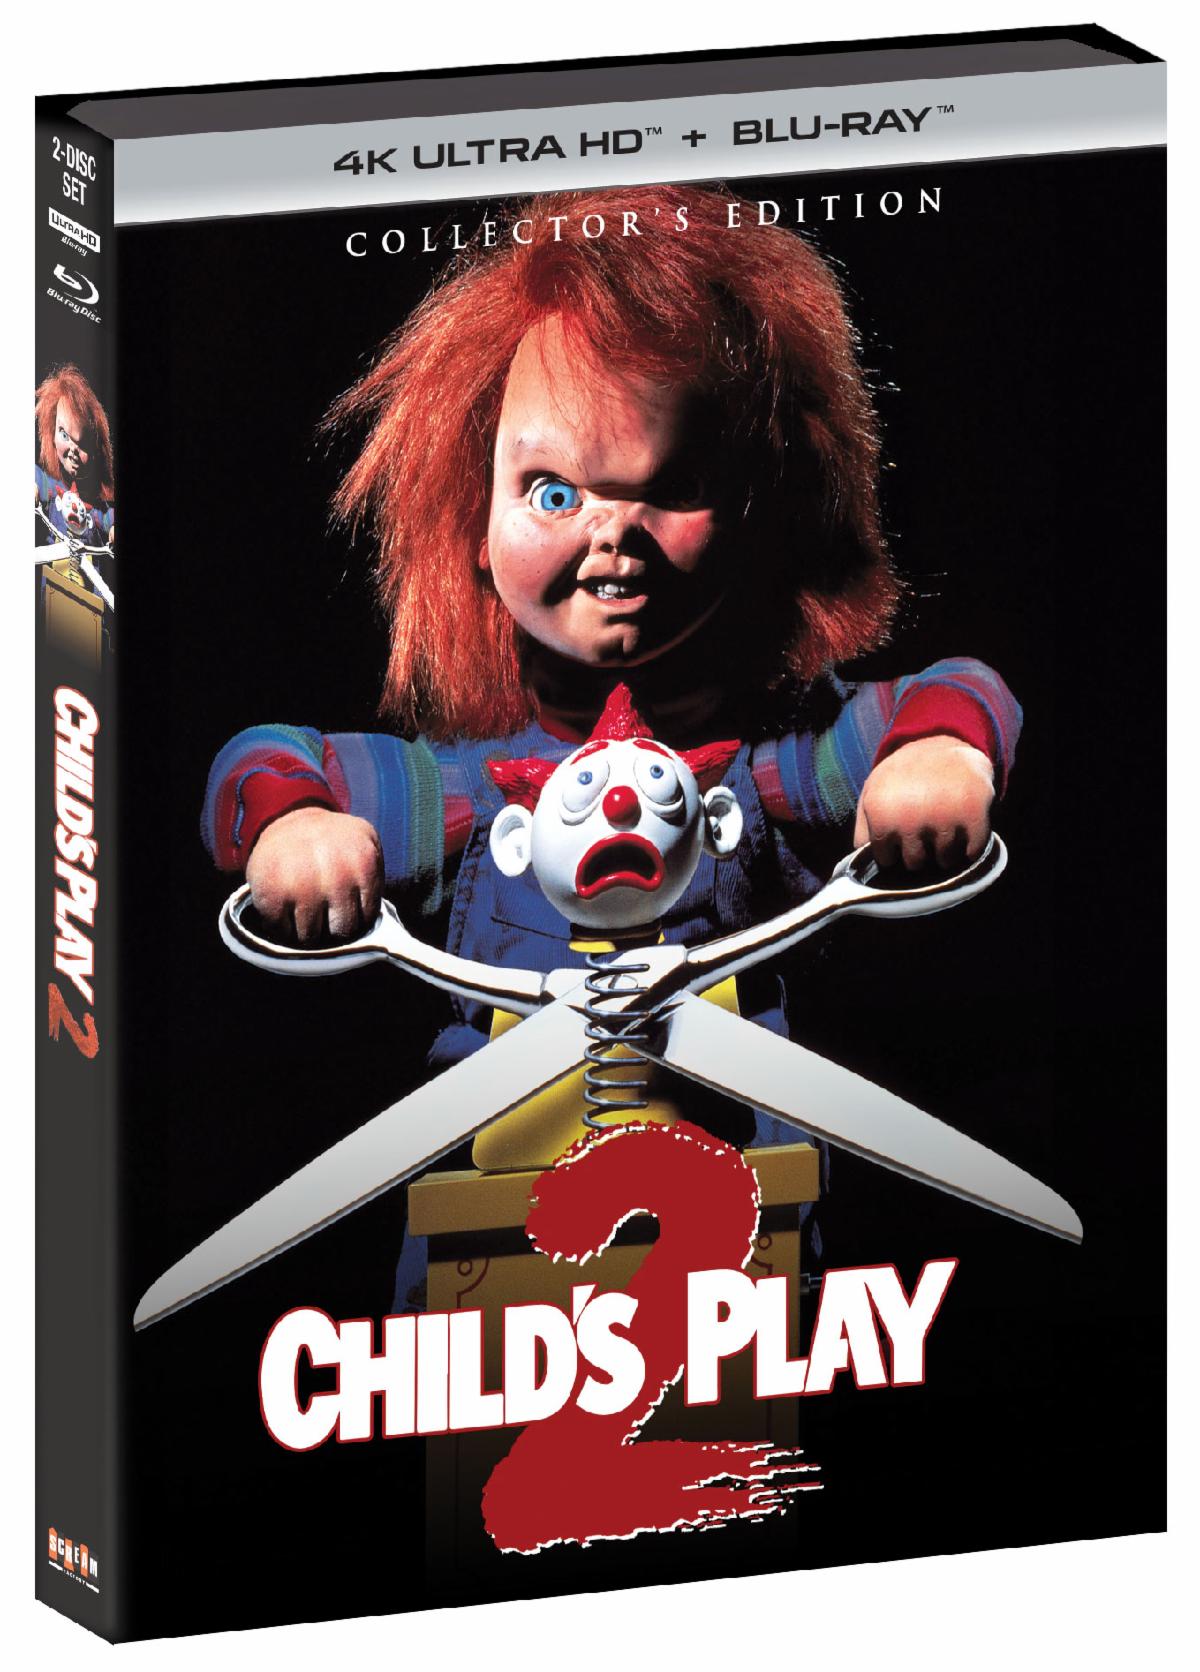 Child's Play 2 4K UHD Collector's Edition